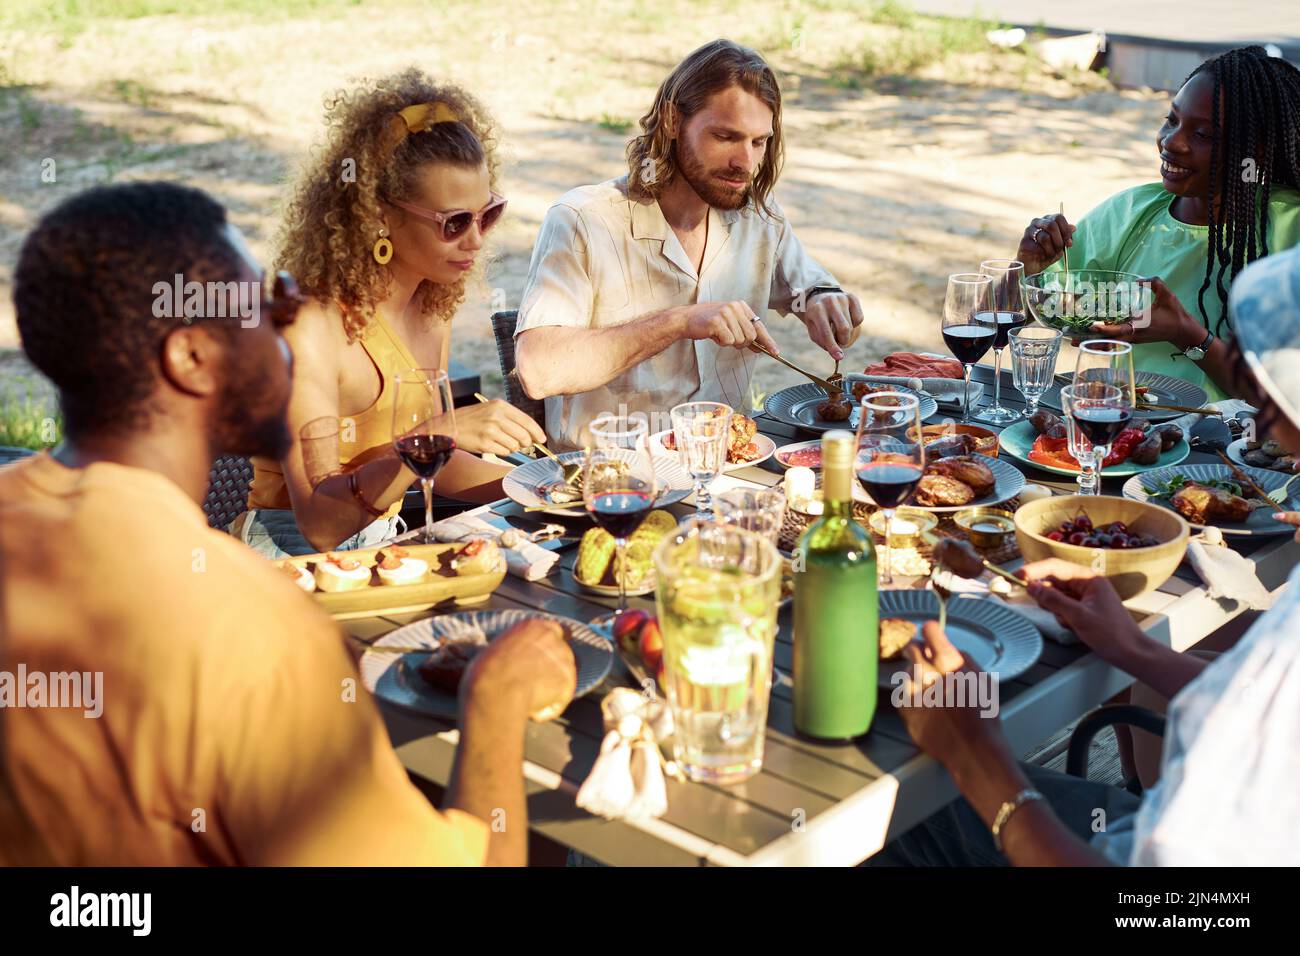 Diverse group of people enjoying dinner together outdoors in Summer sitting at table with delicious homemade feast Stock Photo